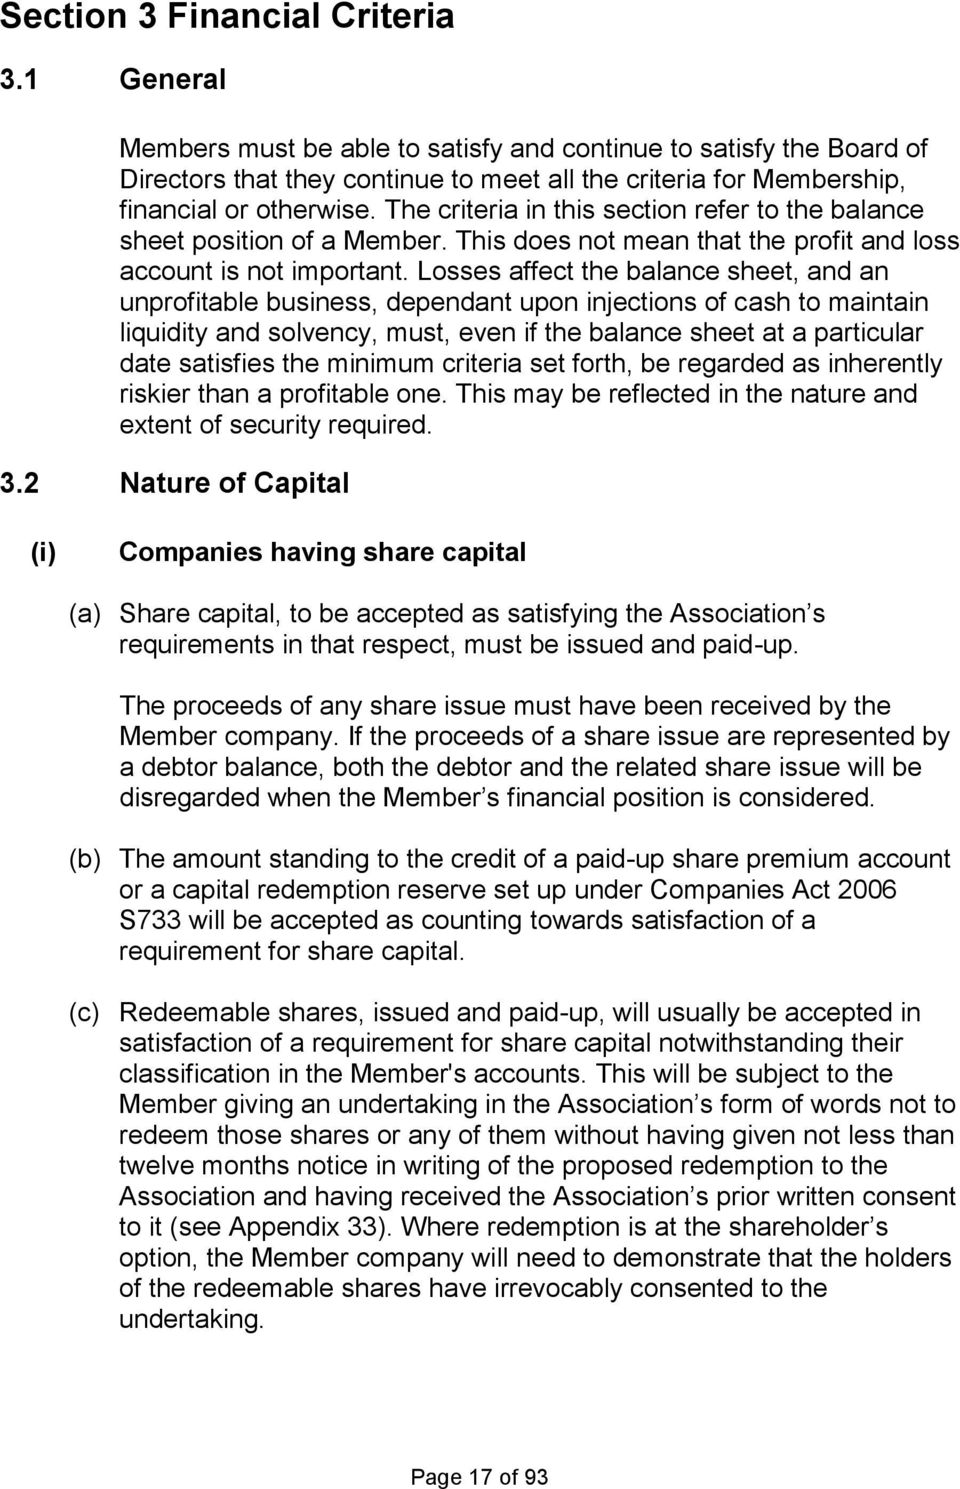 The criteria in this section refer to the balance sheet position of a Member. This does not mean that the profit and loss account is not important.